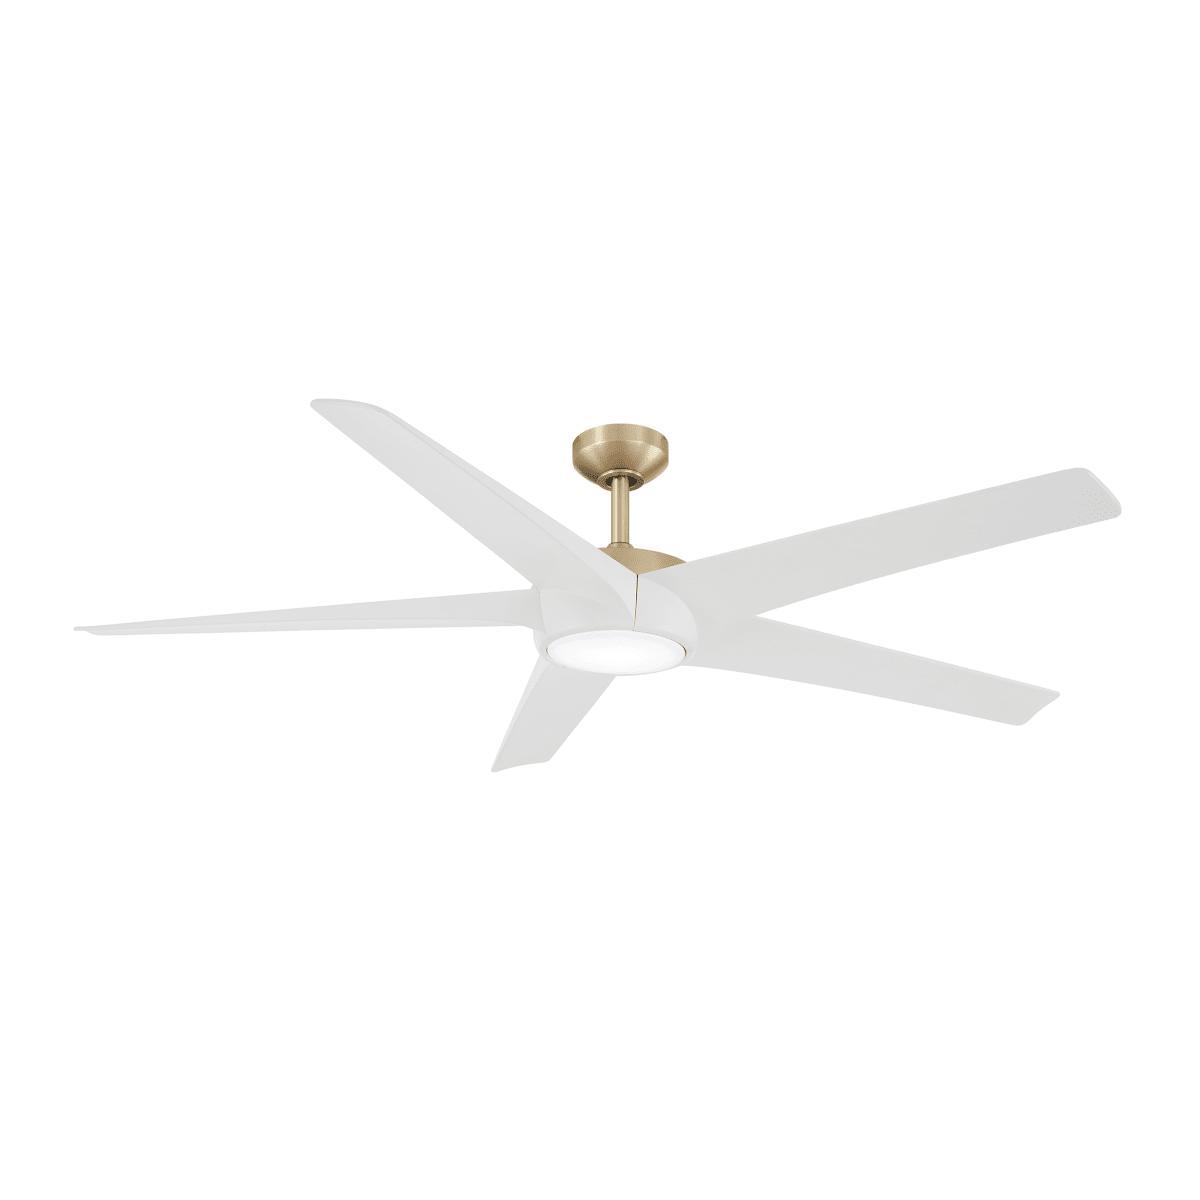 Skymaster 64 Inch LED Ceiling Fan with Light Kit and Remote, Soft Brass with Flat White Blades - Bees Lighting